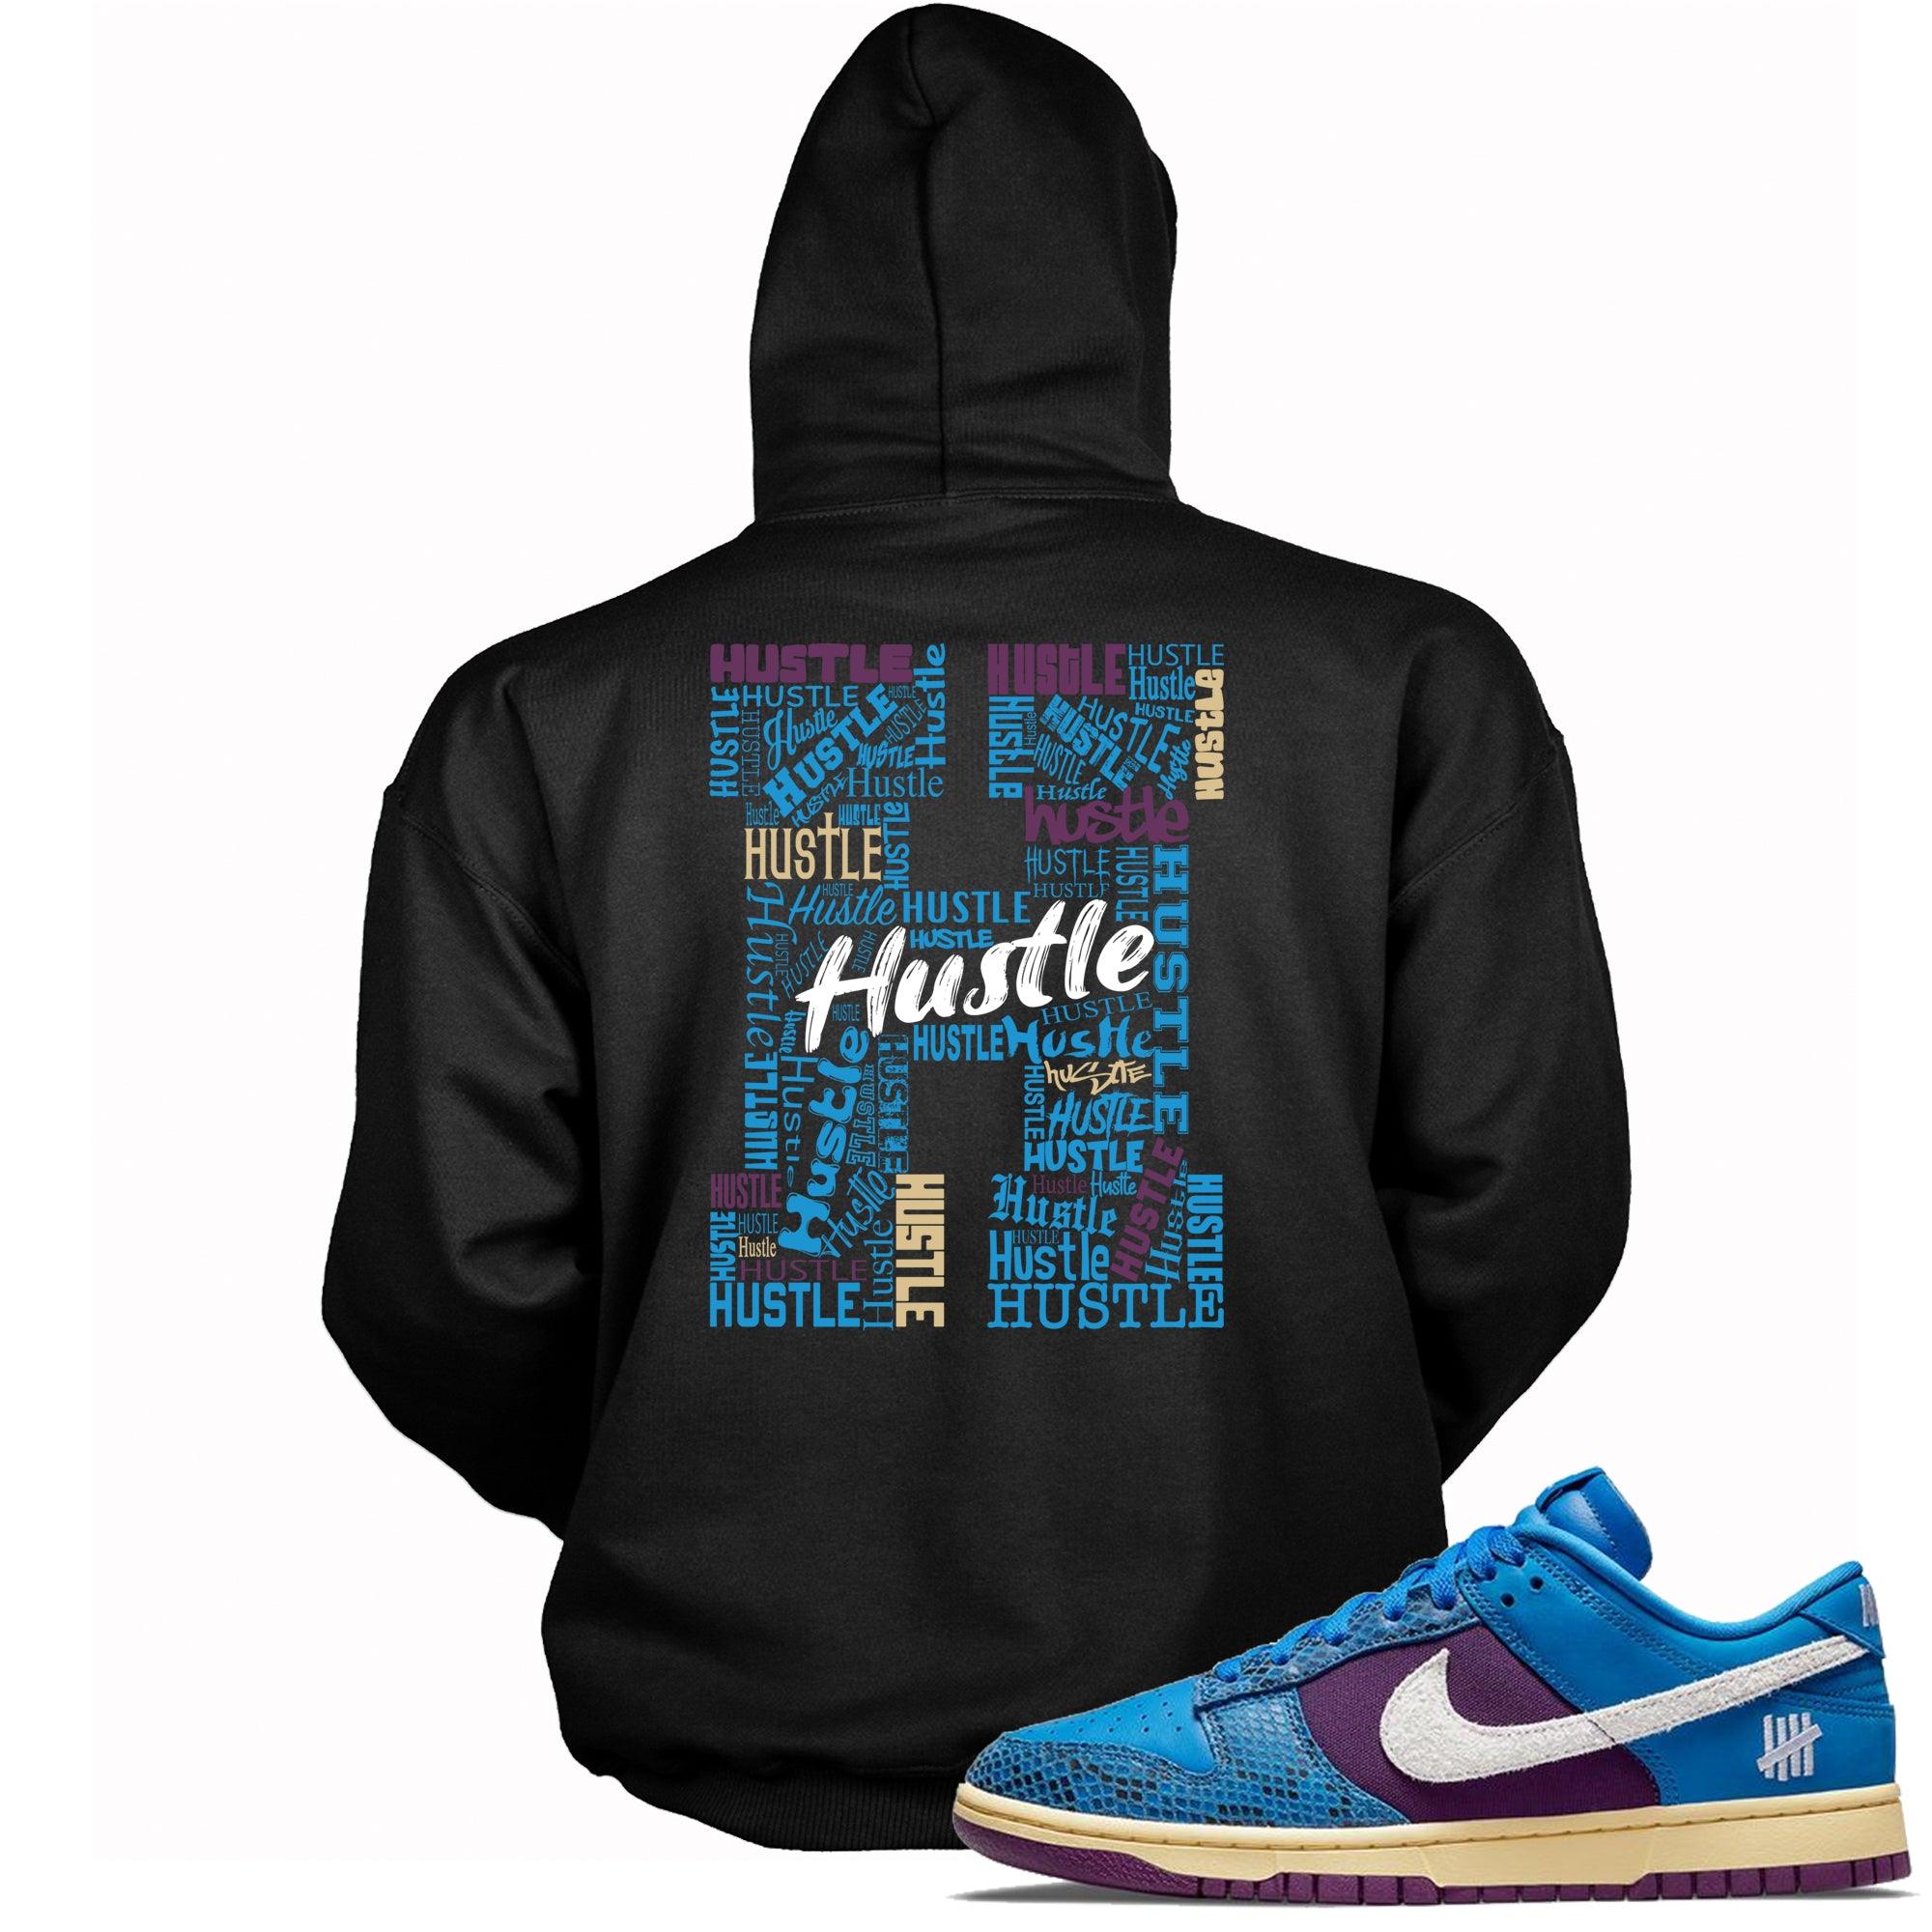 Black H For Hustle Hoodie Nike Dunks Low Undefeated 5 On It Dunk vs AF1 photo